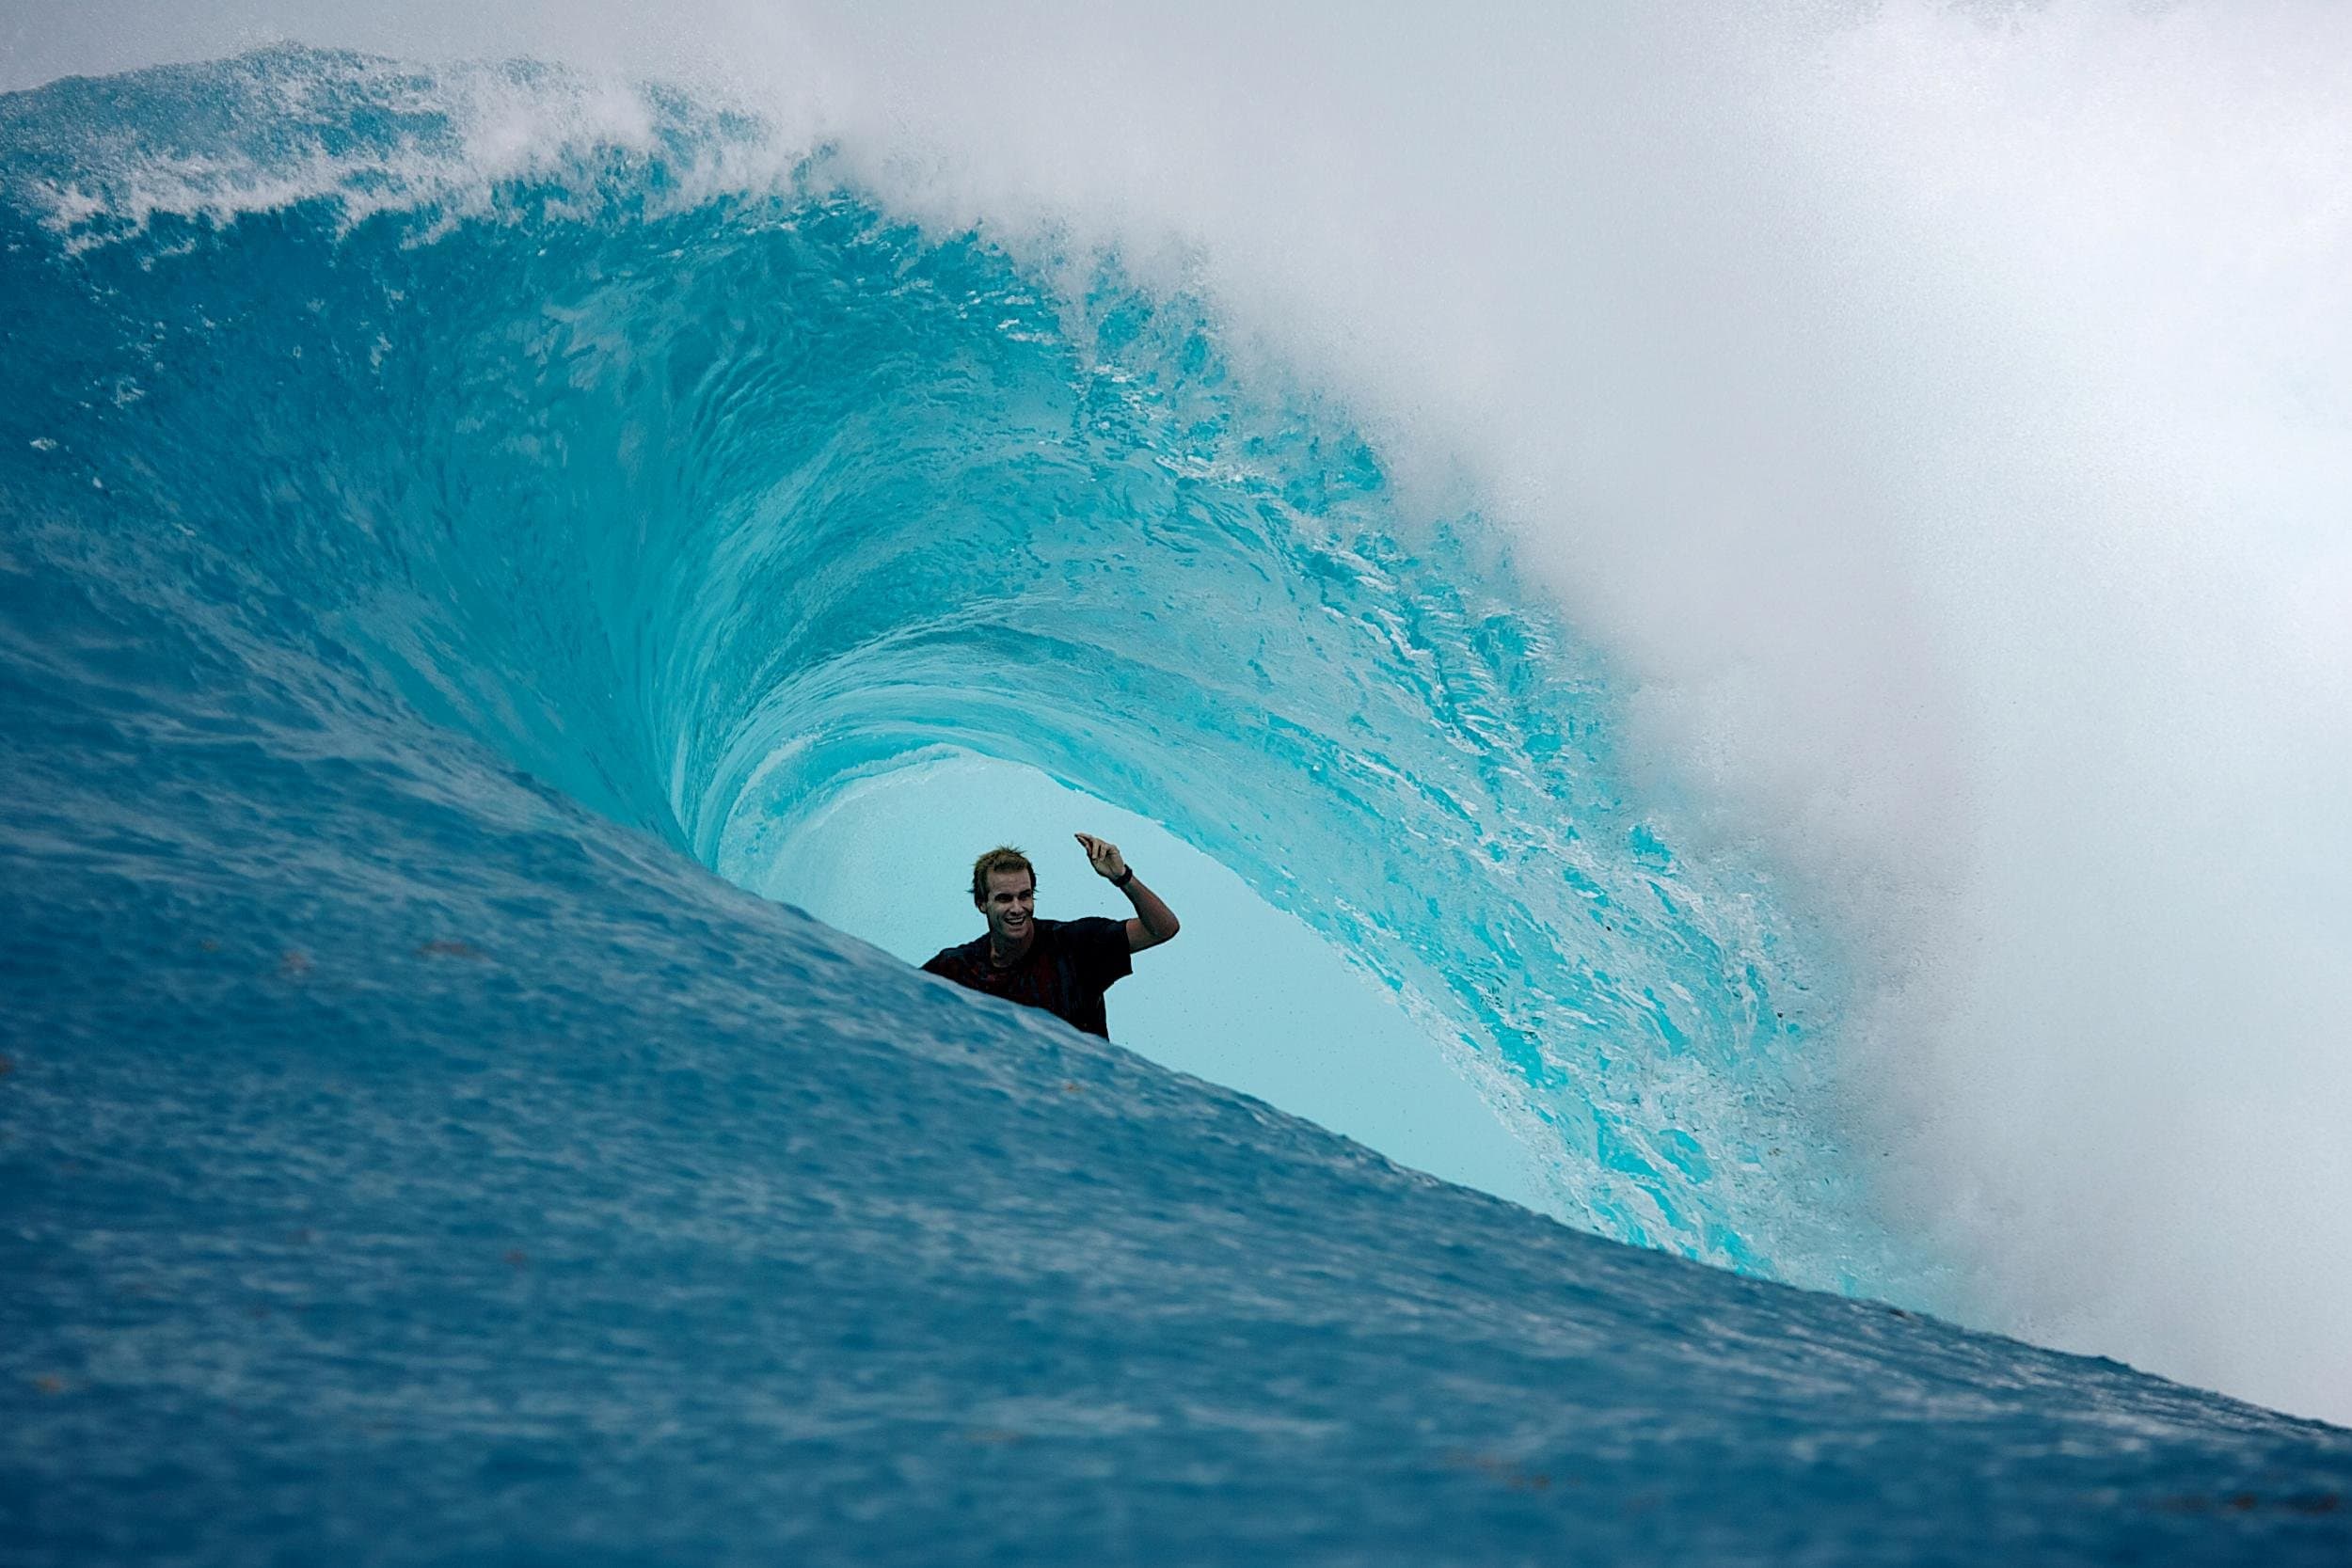 P-Pass surf wave - 10 of the best shots of all time